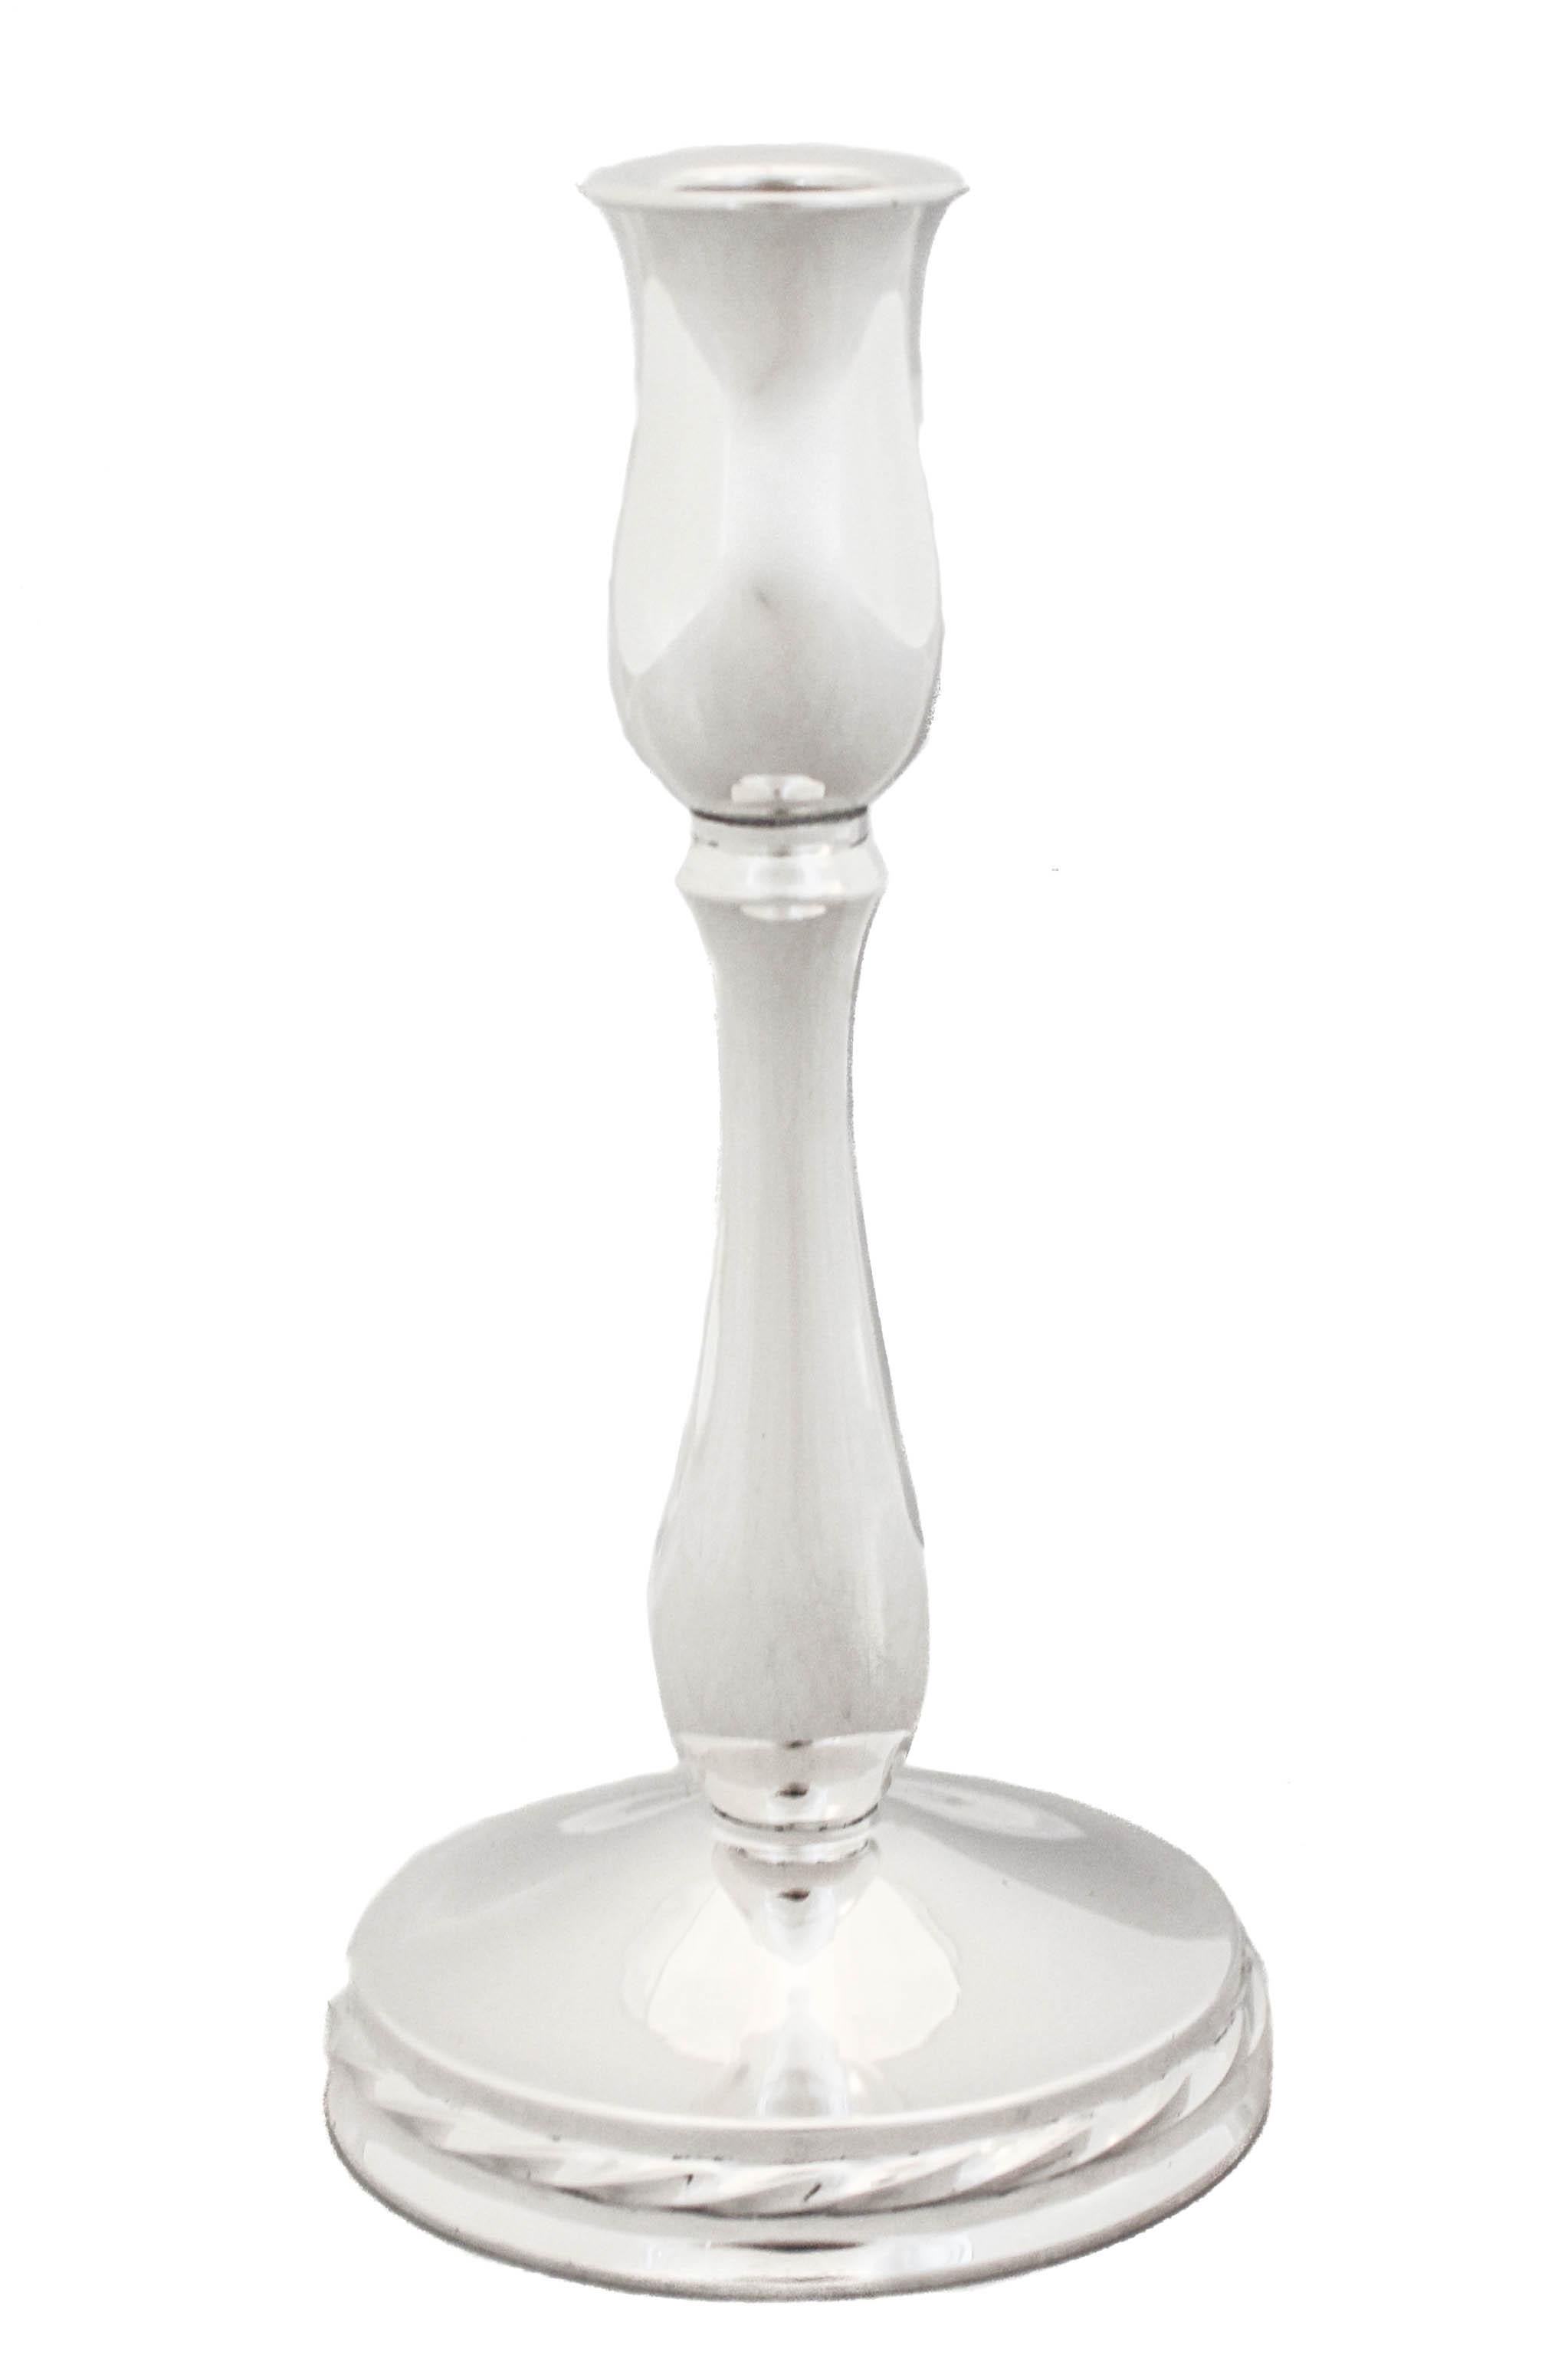 These sterling silver candlesticks are sleek and contemporary. Made by Towle Silversmiths they have a tulip shape and a gadroon design around the base. Perfect for any decor and timeless.